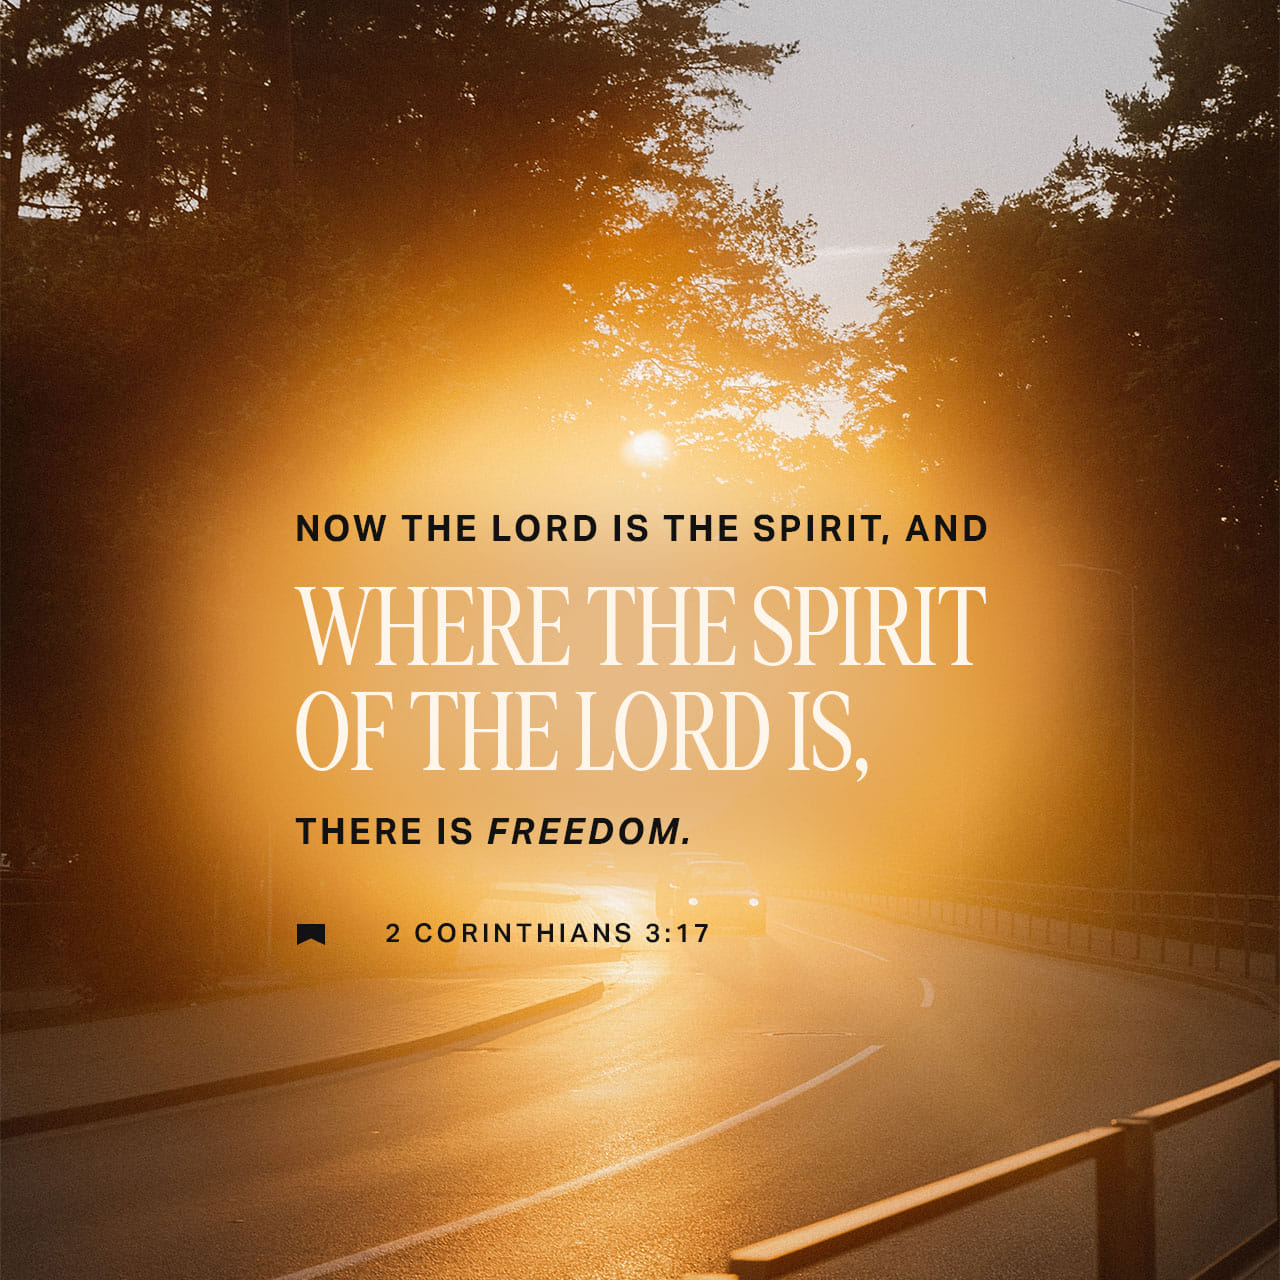 2 Corinthians 3:17 Now the Lord is that Spirit: and where the Spirit of the Lord is, there is liberty. | King James Version (KJV) | Download The Bible App Now